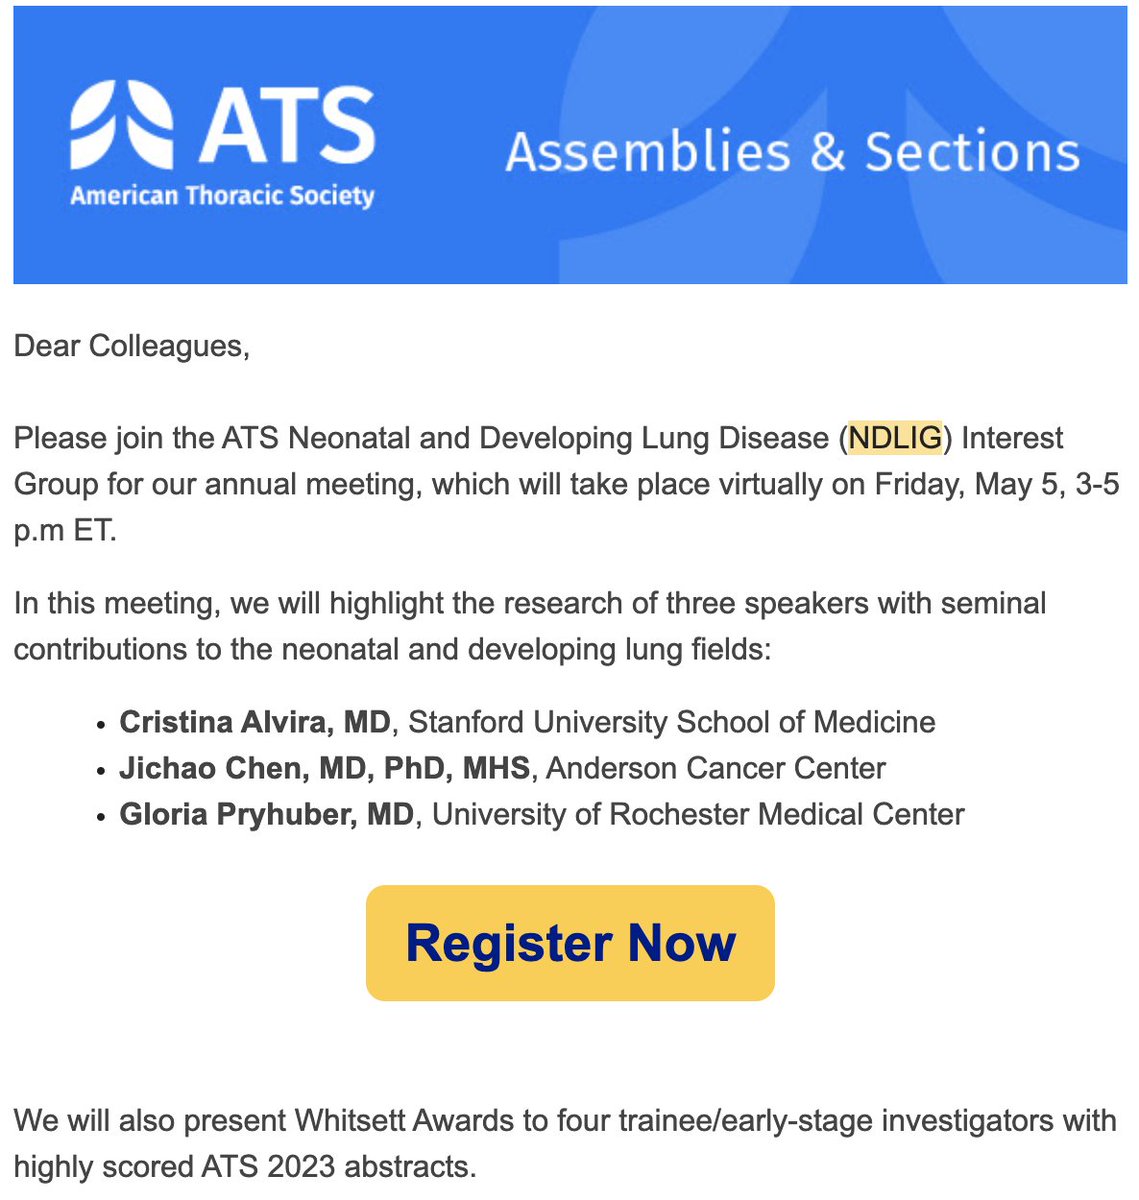 Congratulations to the NDLIG chairs: @premiepulmdoc @vitiellp This an excellent upcoming session for those interested in the neonatal and developing lung.